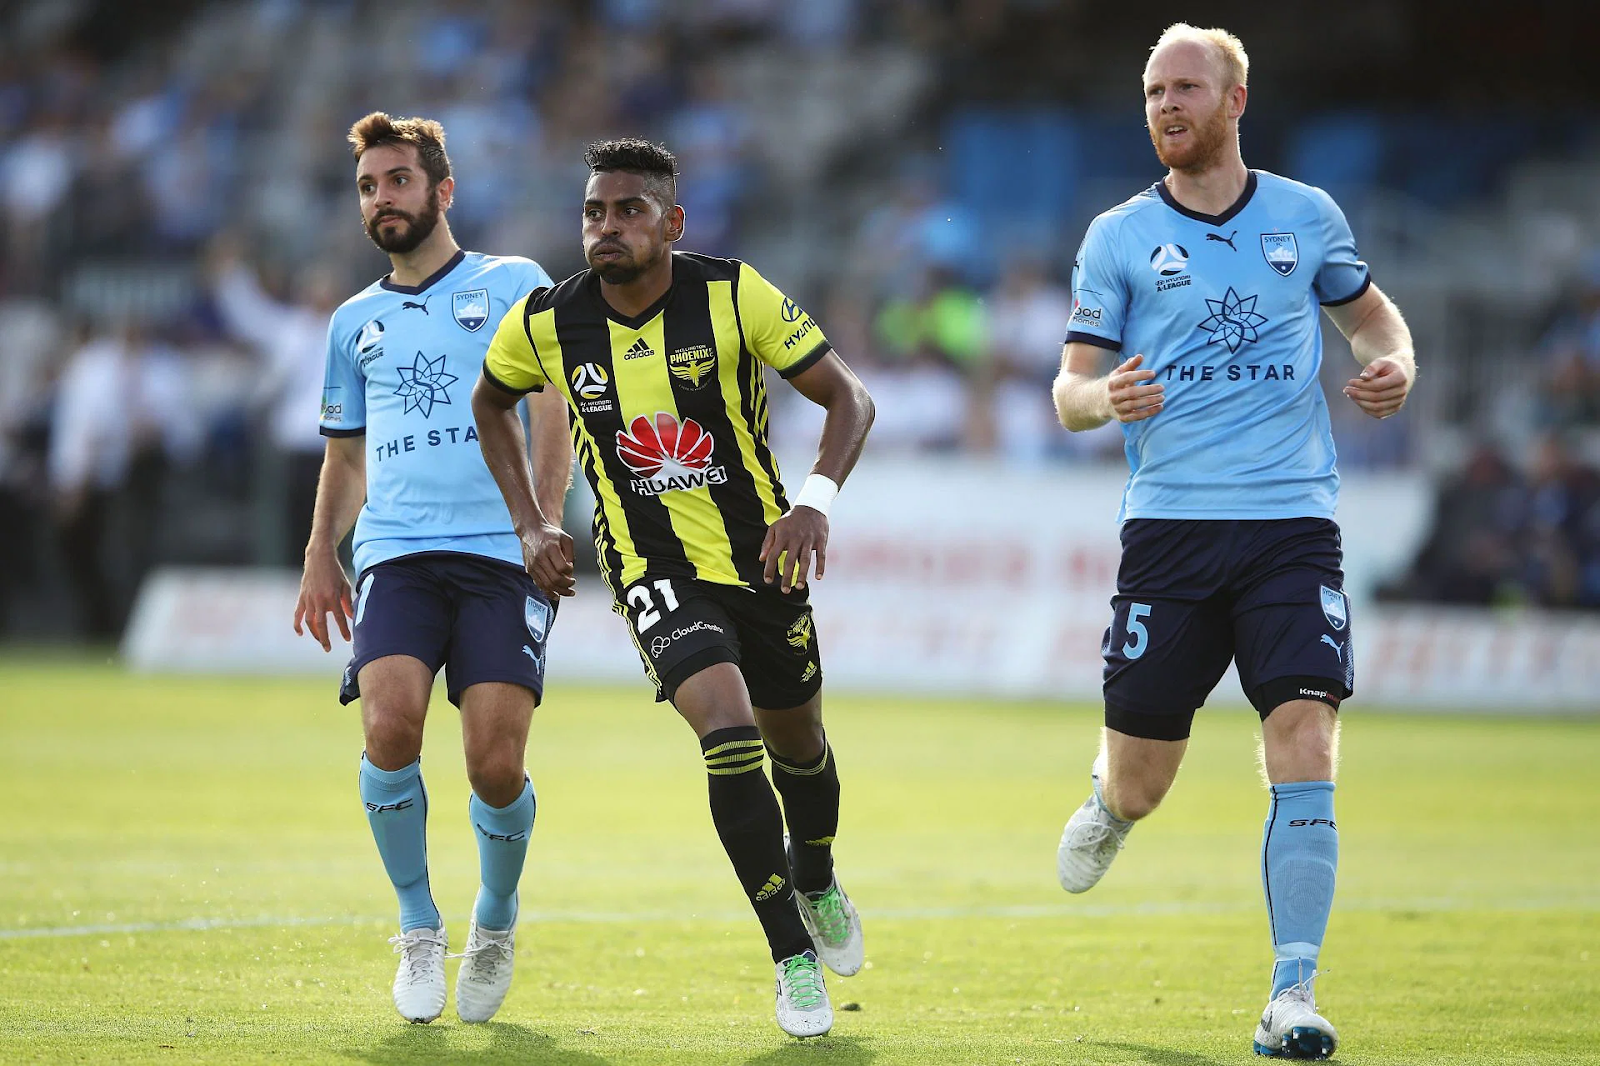 Sydney FC vs. Central Coast Mariners : On July 21, Sydney FC will play Central Coast Mariners at the FFA Cup of Australia.